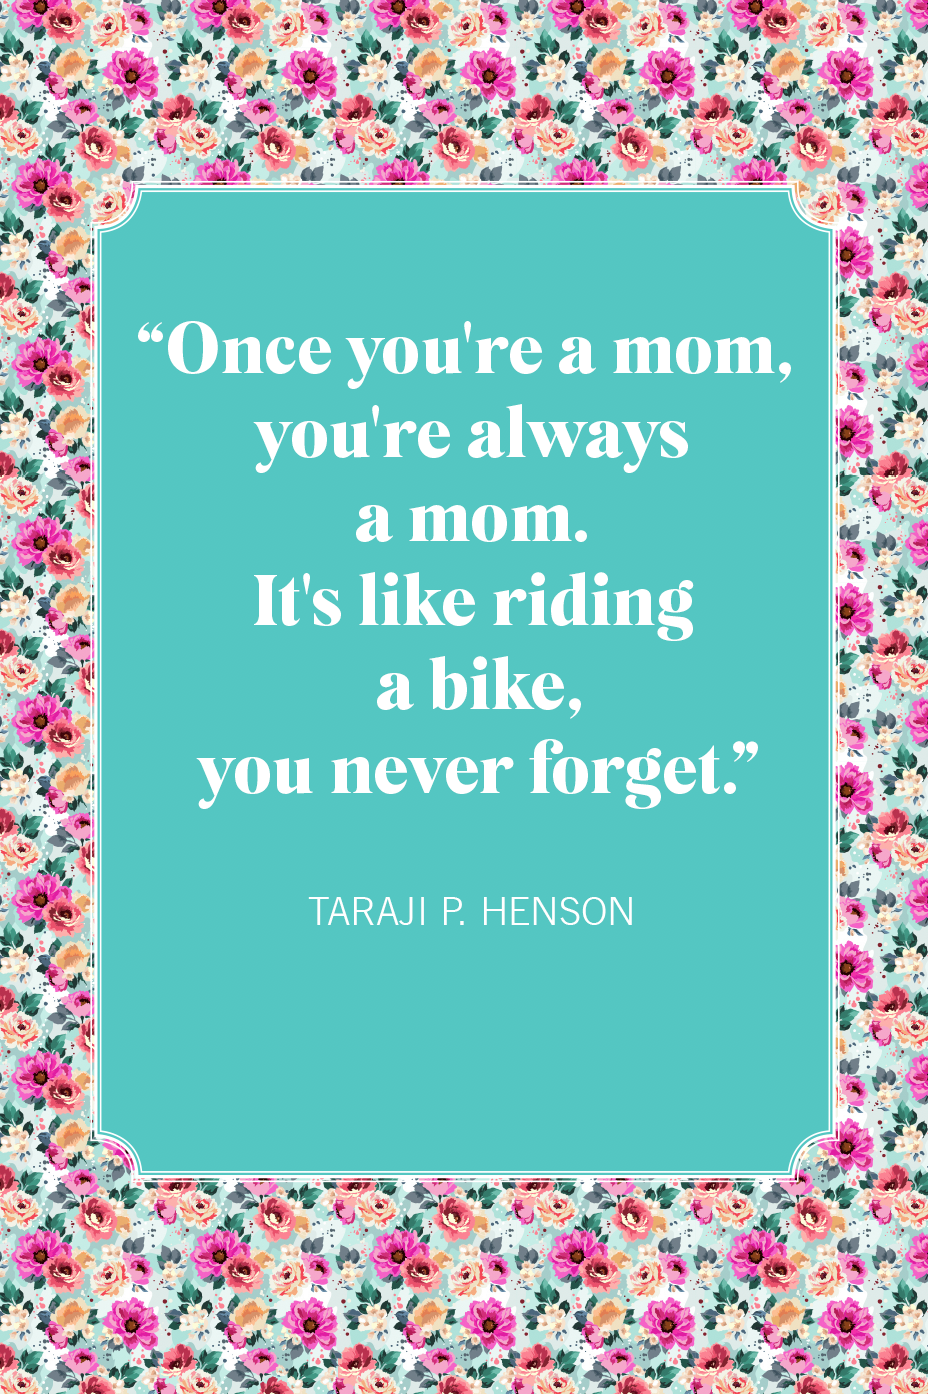 75 Best Mother-Daughter Quotes - Quotes About Moms and Daughters